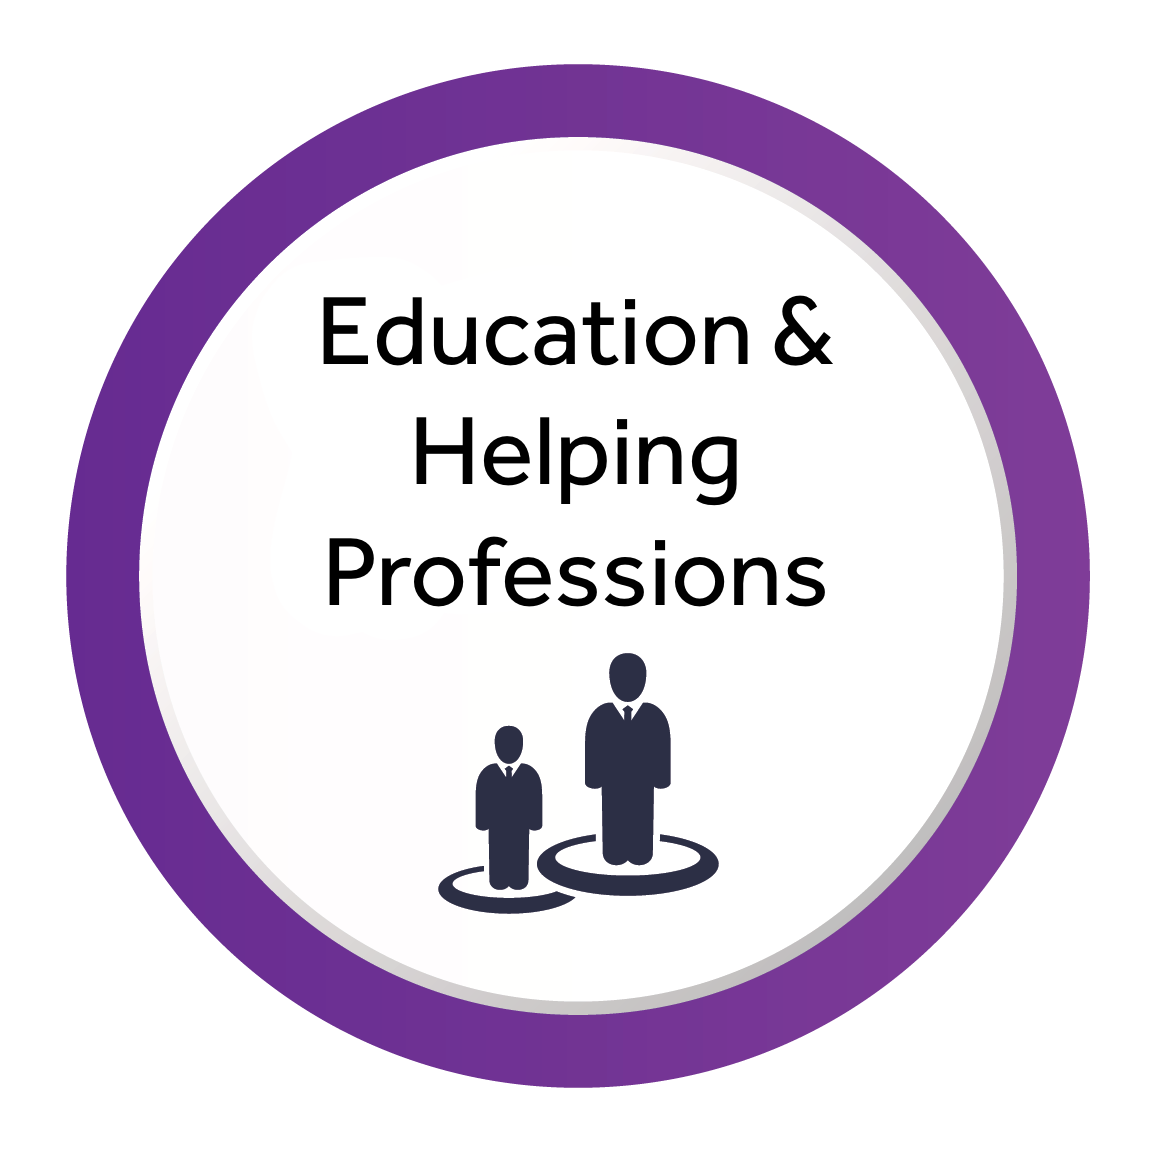 Education & Helping Professions